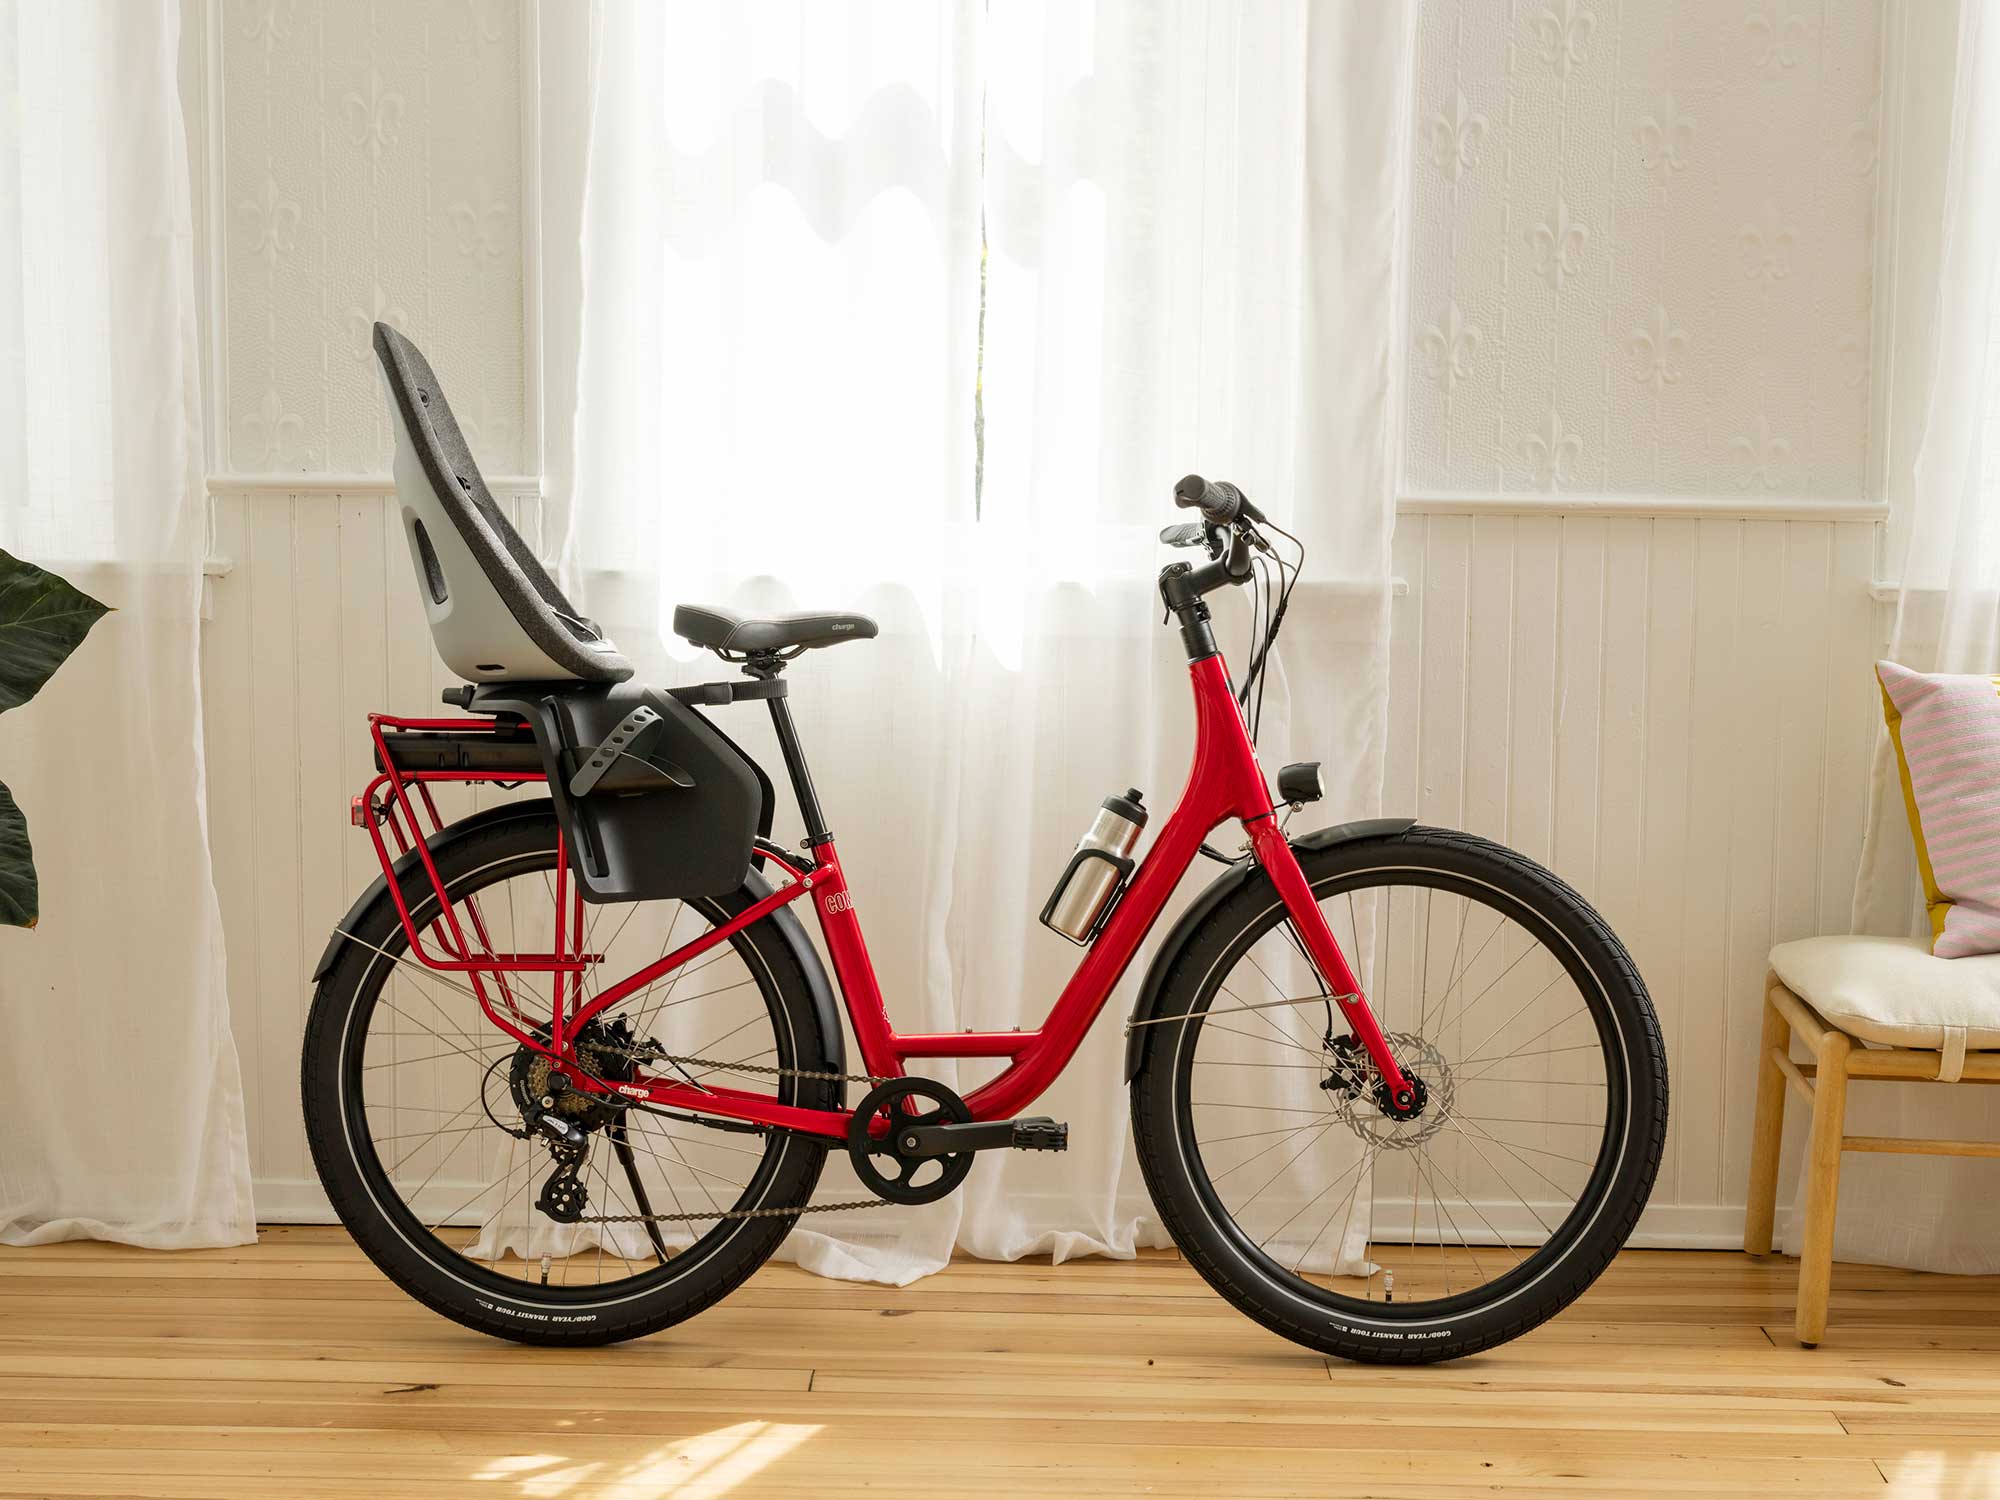 The Charge Comfort 2 e-bike is a smooth ride that fits in tight spaces